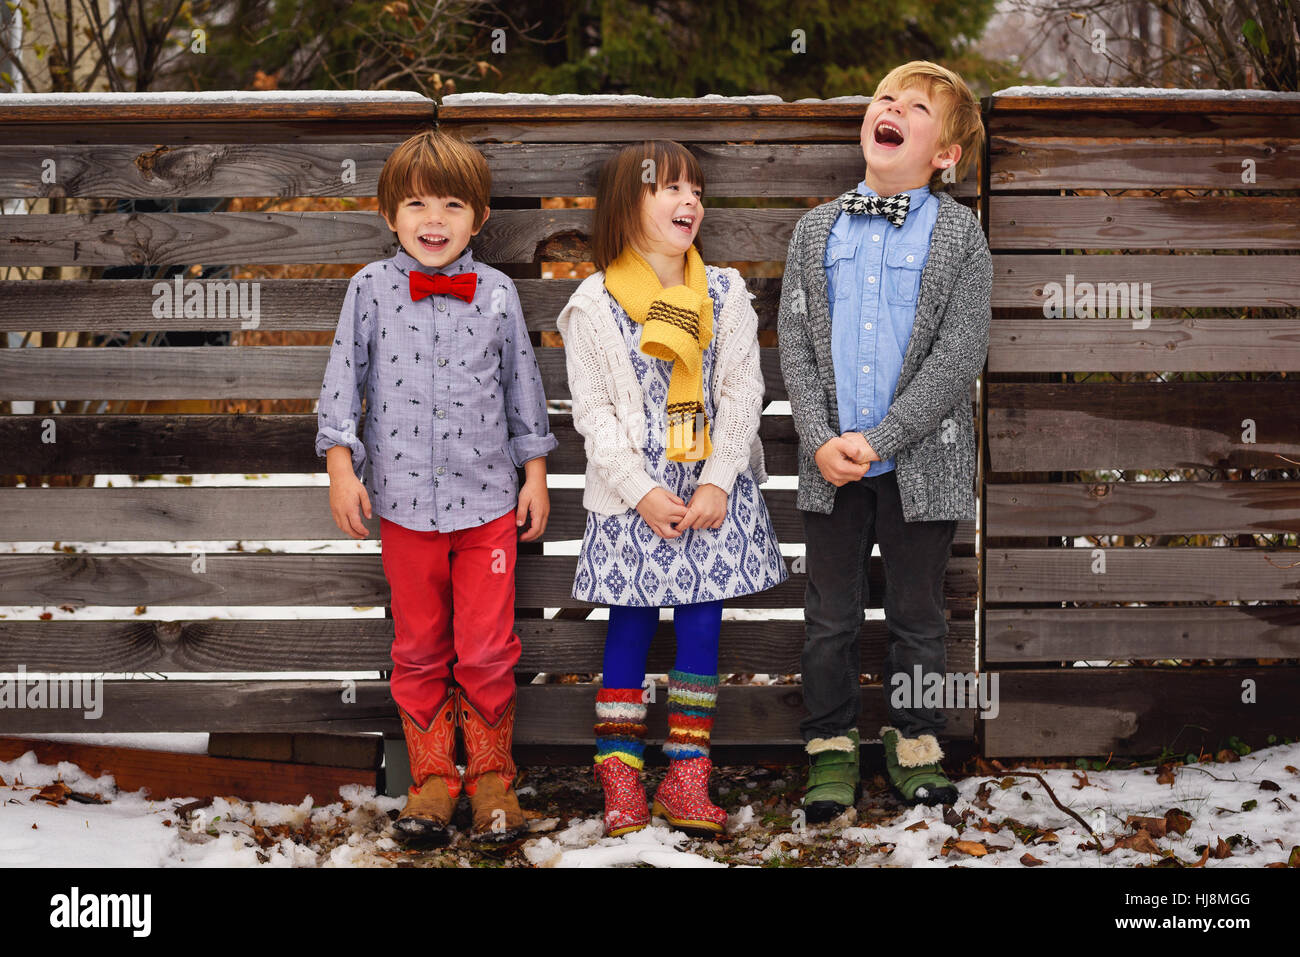 Three happy children standing by a fence in the garden Stock Photo